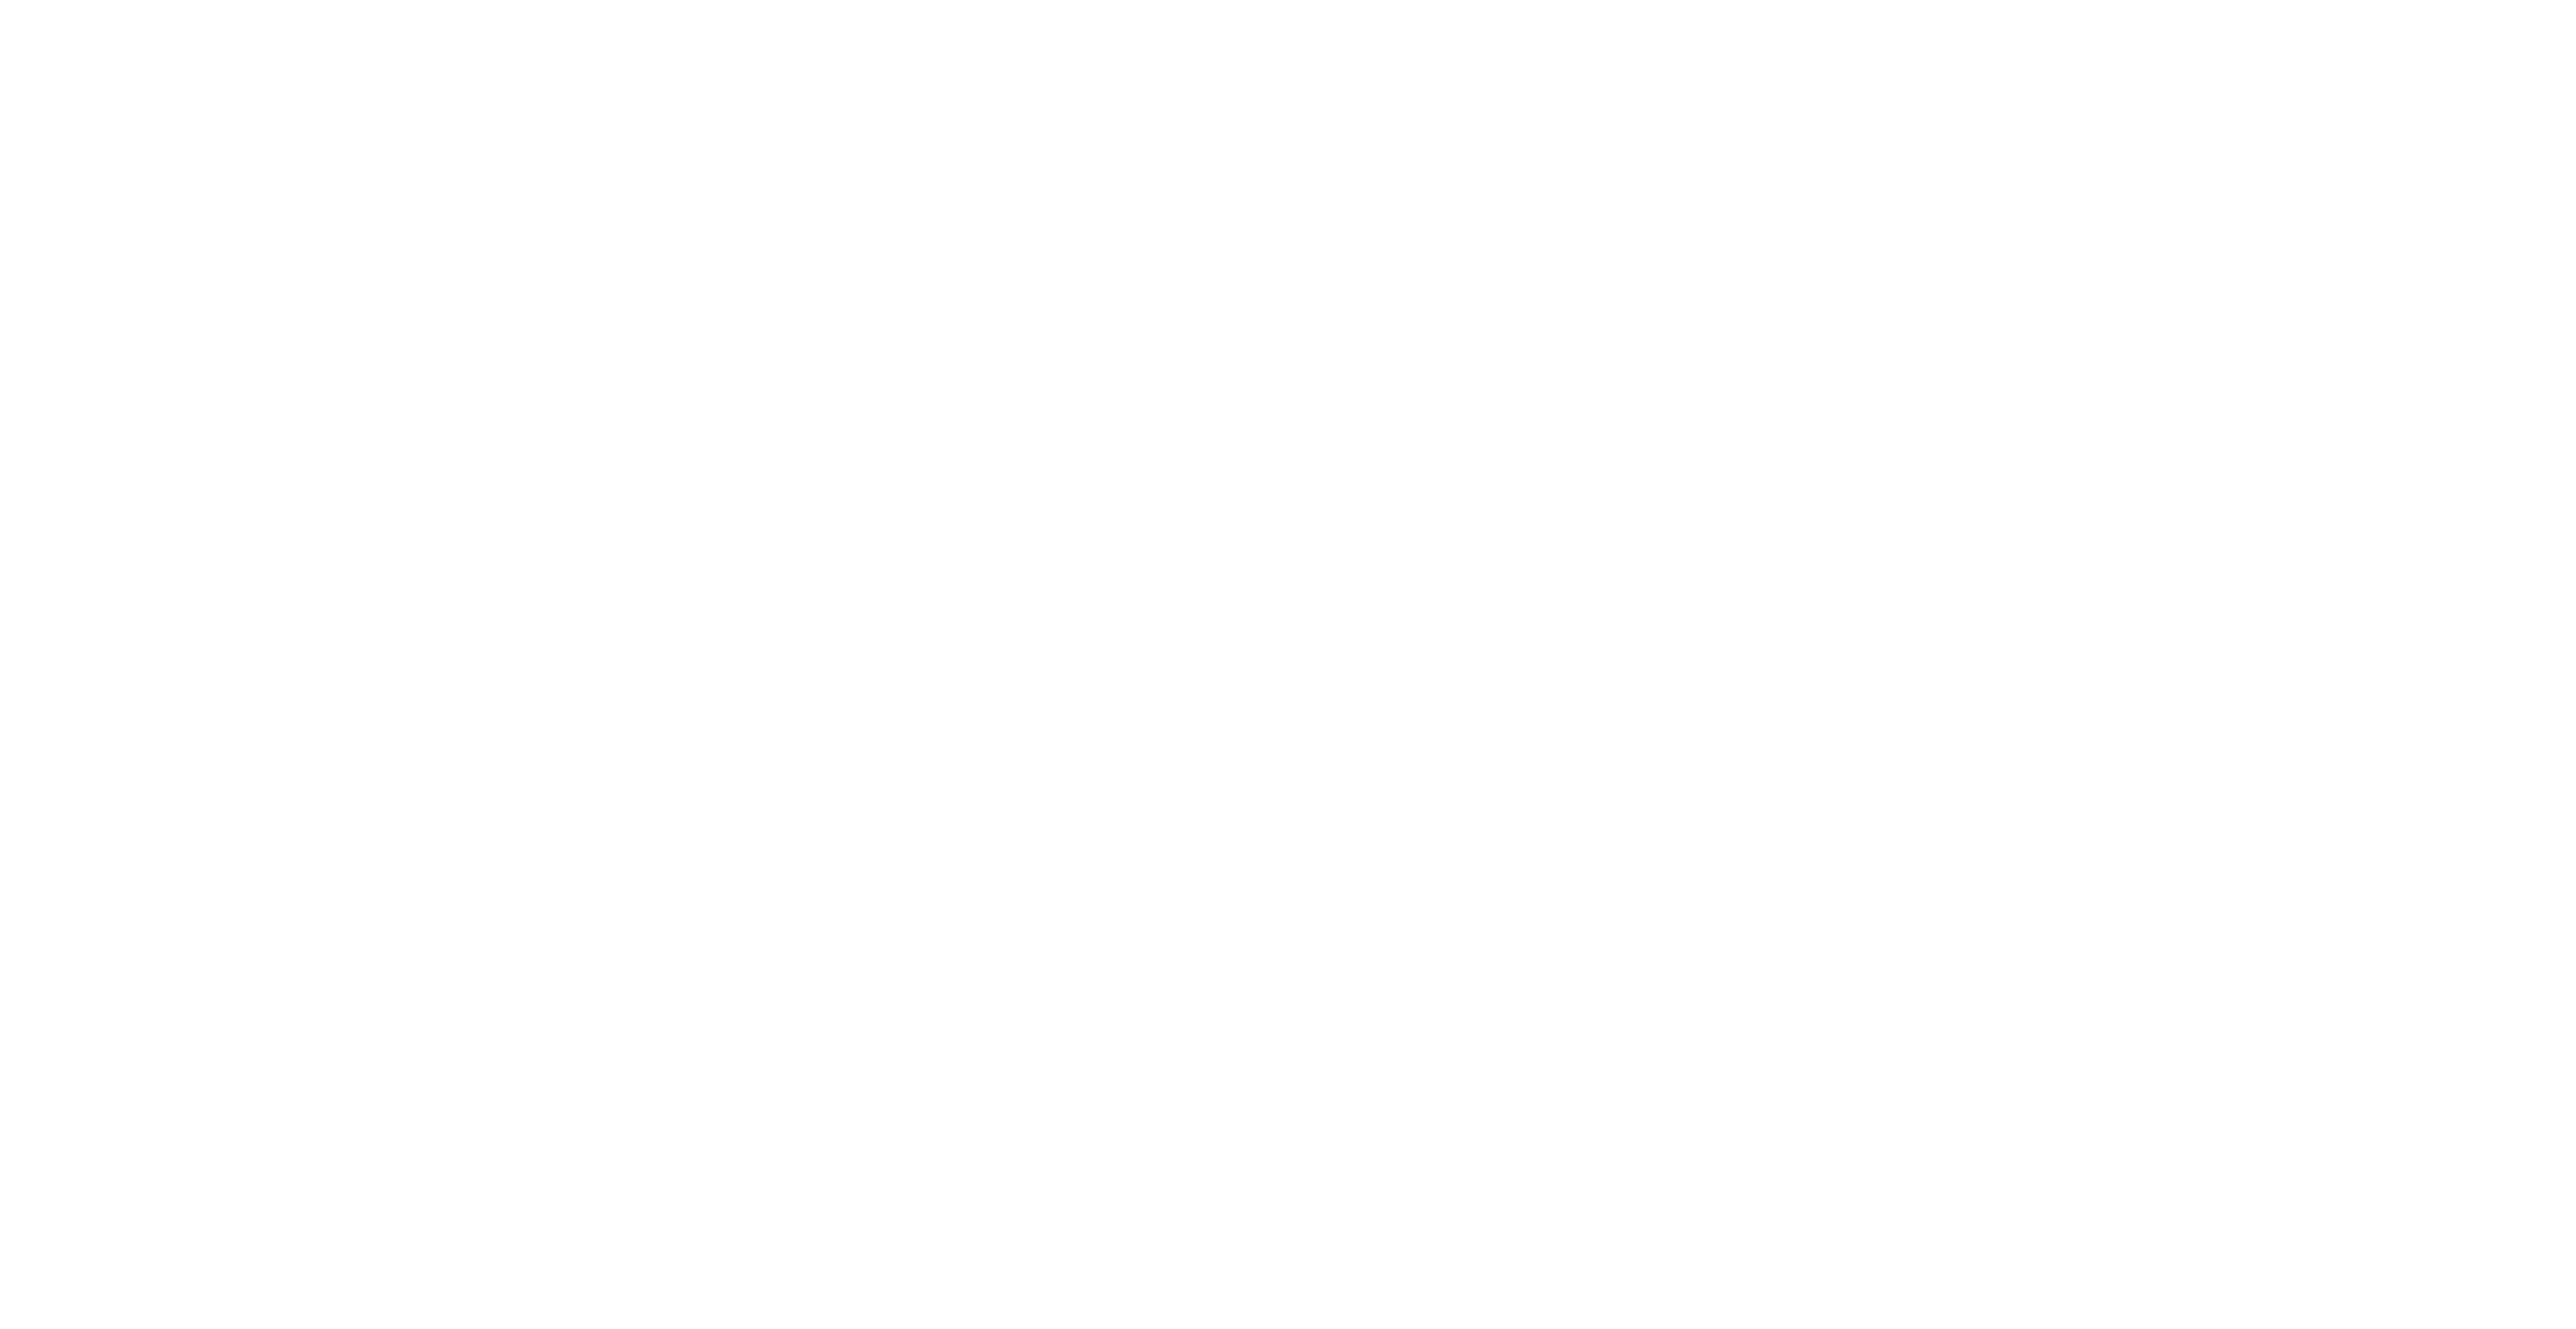 The Sunday Times - Best places to work 2024 (big organisation)